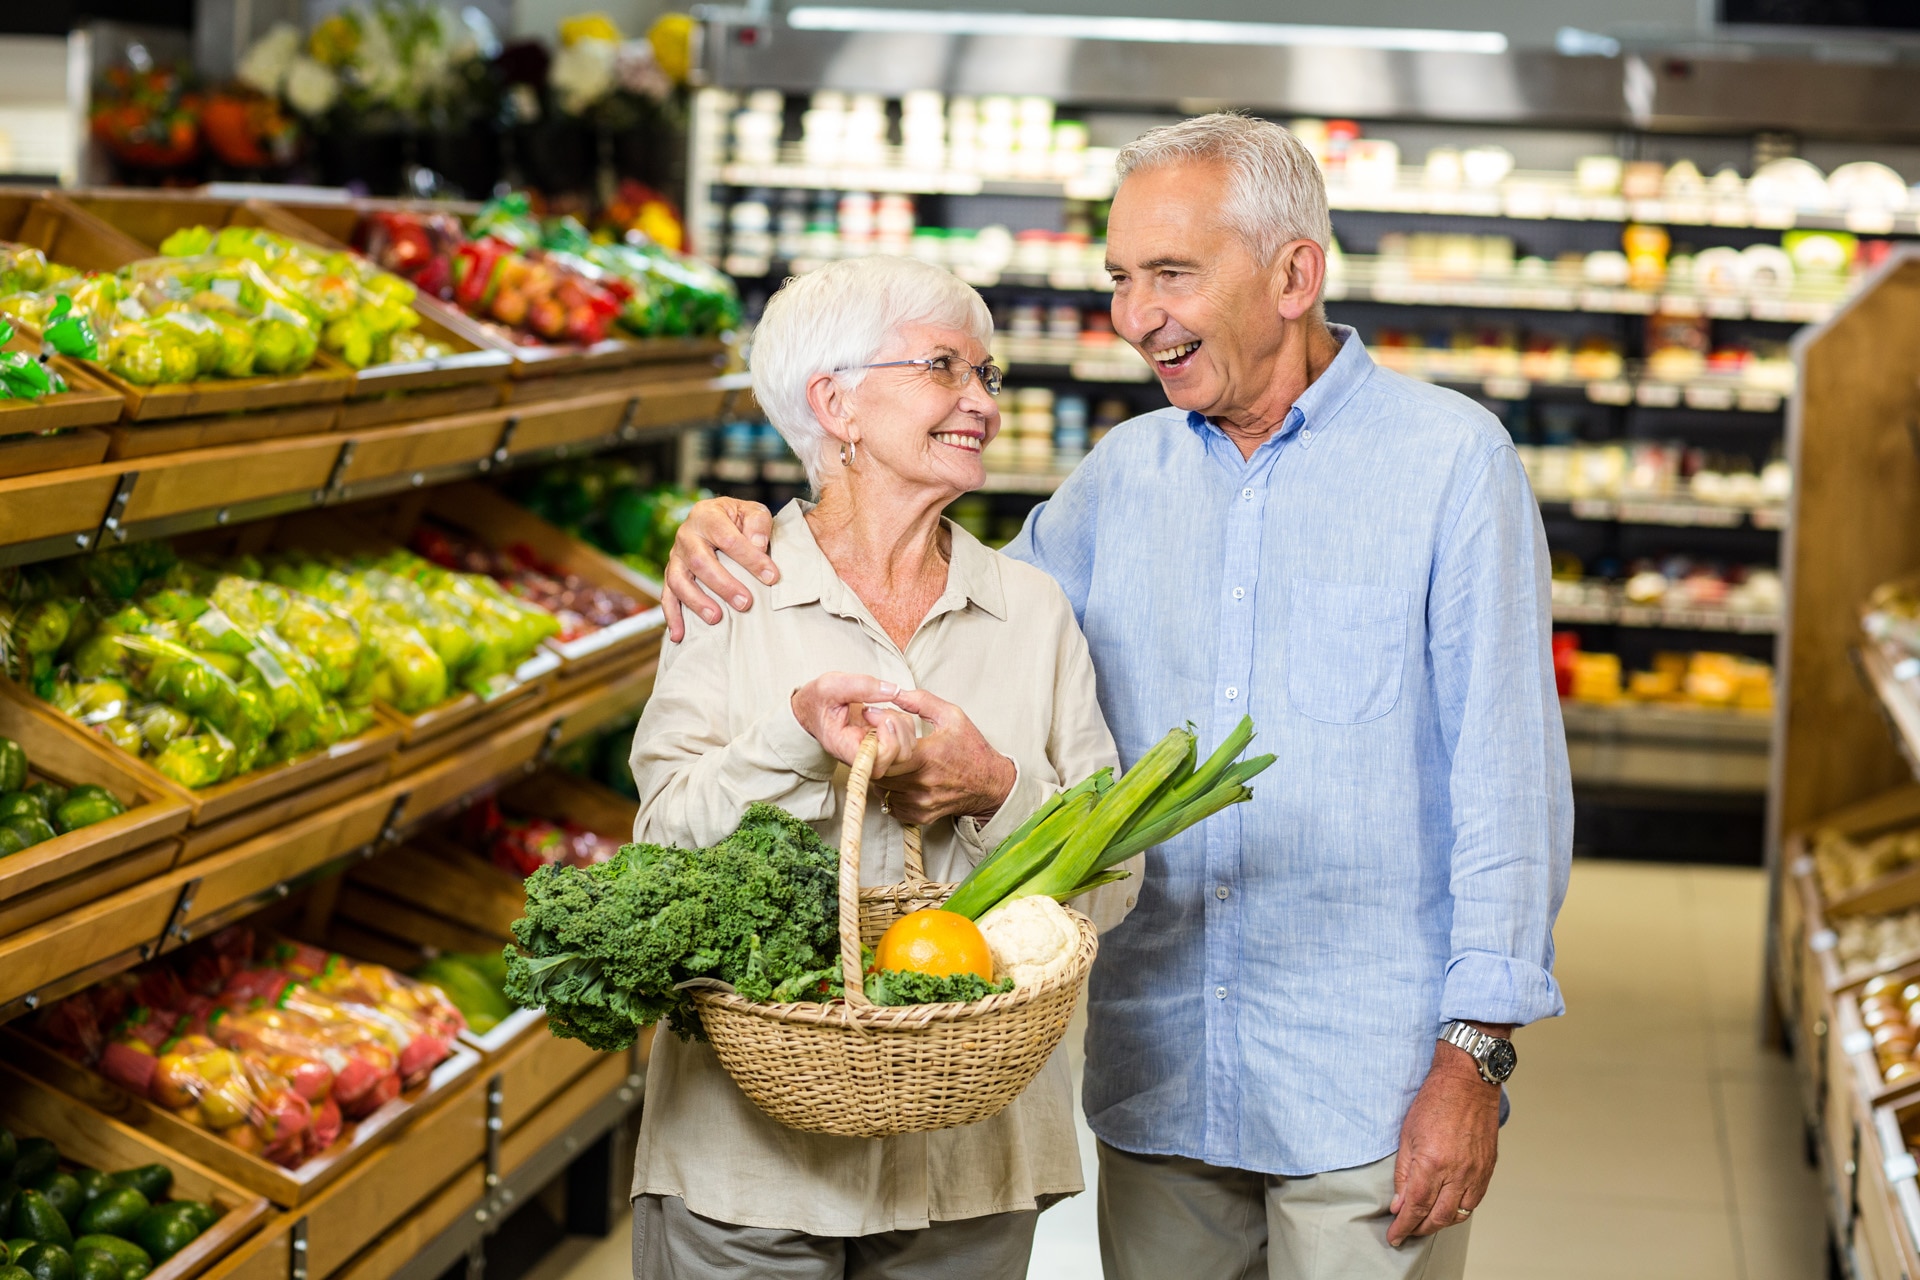 Smiling senior couple holding basket with vegetables at the grocery shop; Shutterstock ID 388006576; purchase_order: -; job: -; client: -; other: -